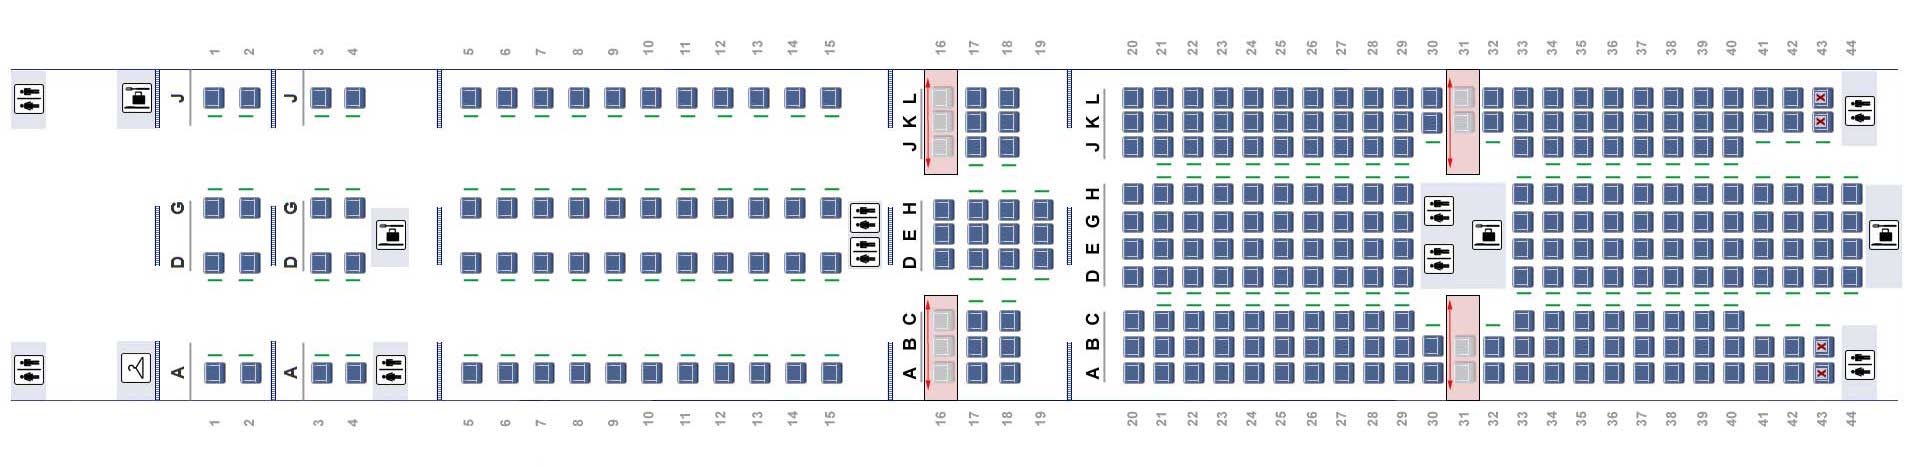 airline seat assignments